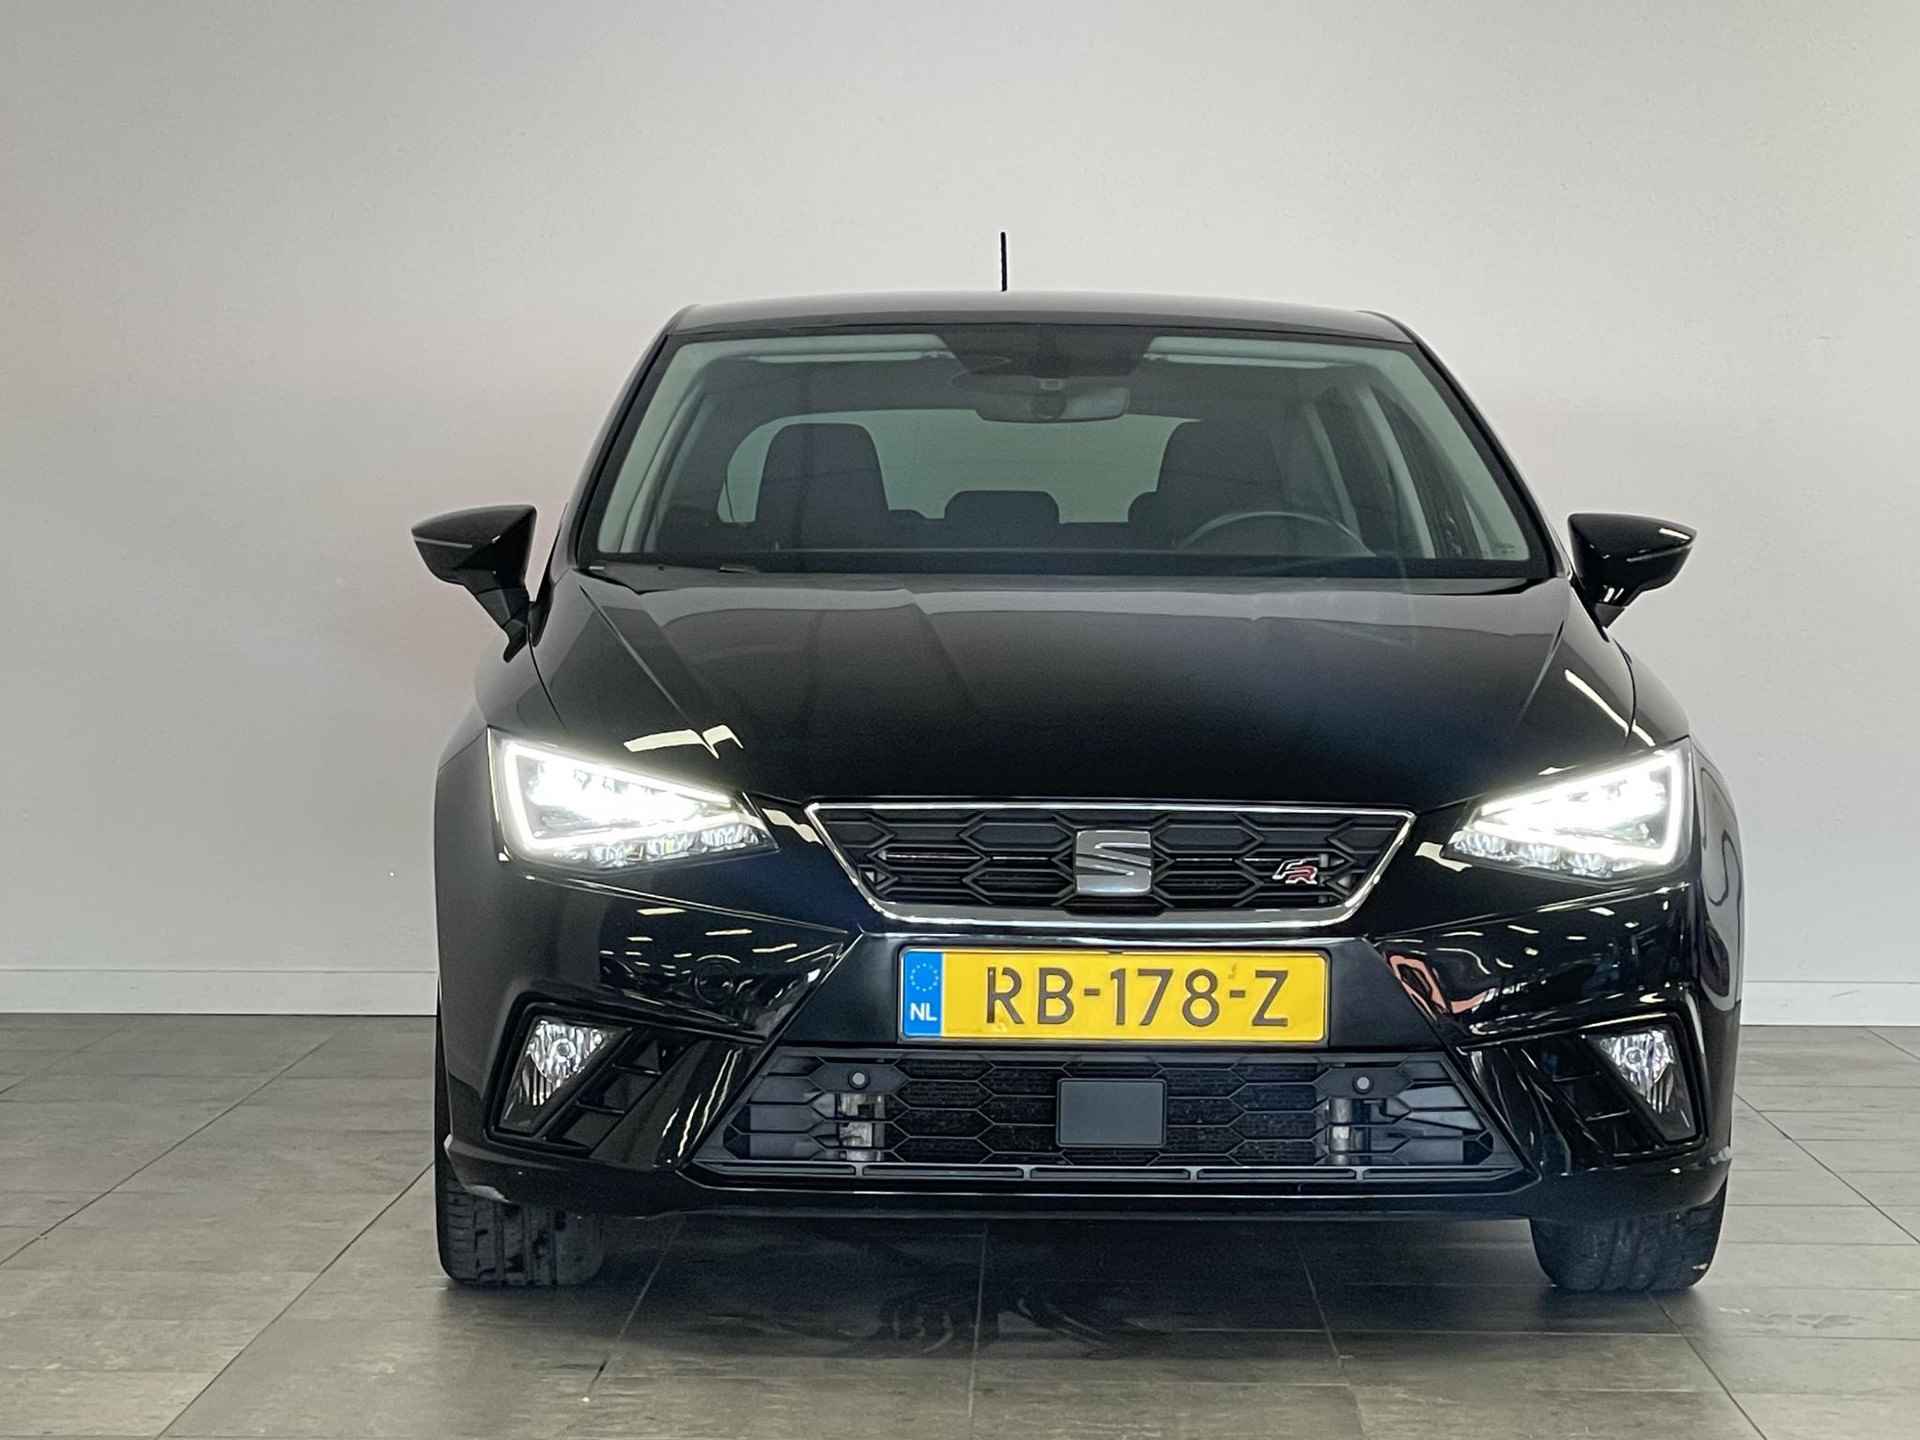 SEAT Ibiza 1.0 TSI FR Business Intense | Navigatie | Climate Control | LED | 17 inch - 6/44